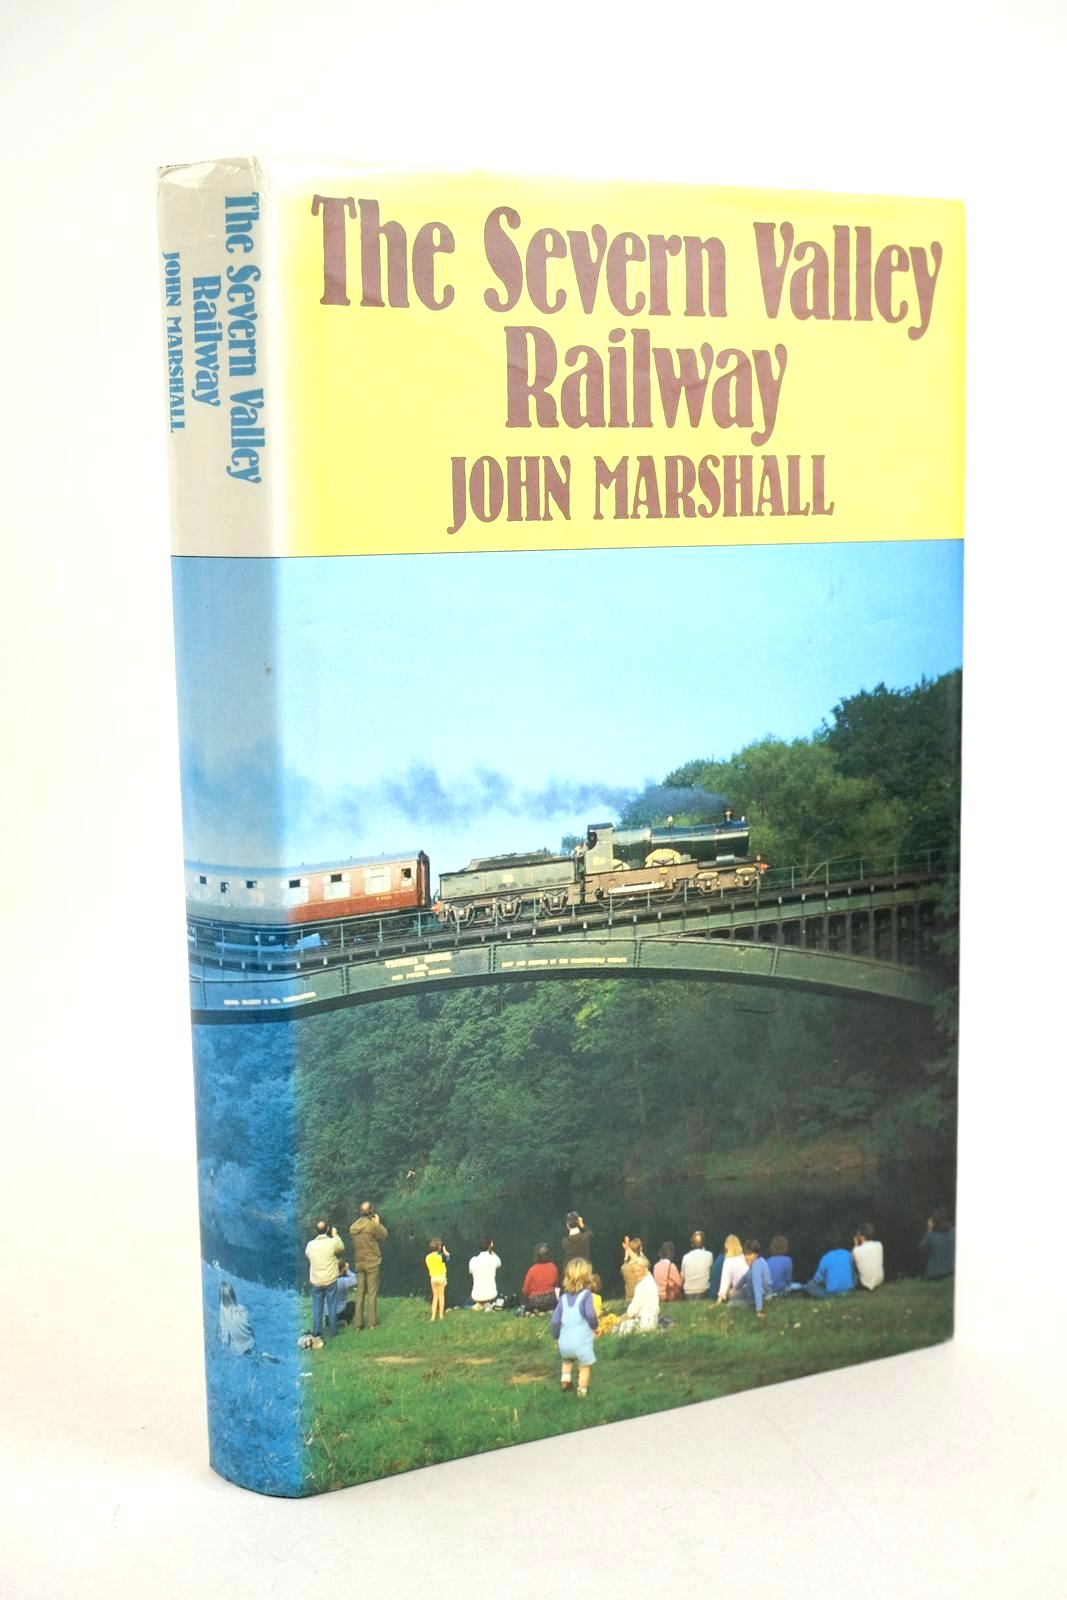 Photo of THE SEVERN VALLEY RAILWAY written by Marshall, John published by David St John Thomas, David &amp; Charles (STOCK CODE: 1327928)  for sale by Stella & Rose's Books